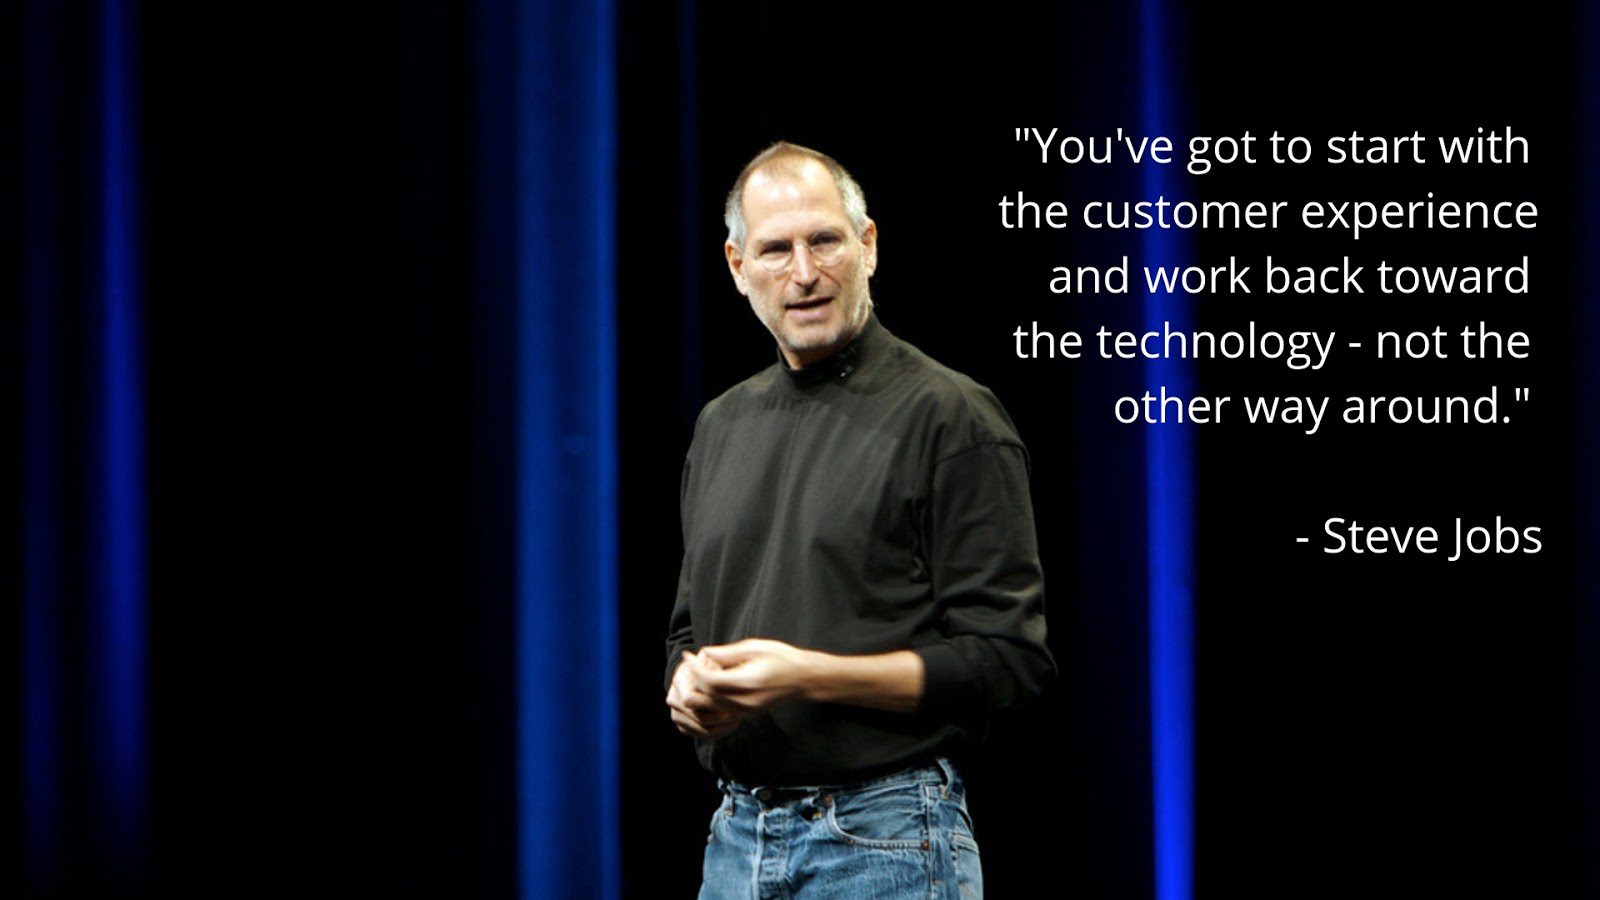 Steve Jobs customer experience research quote